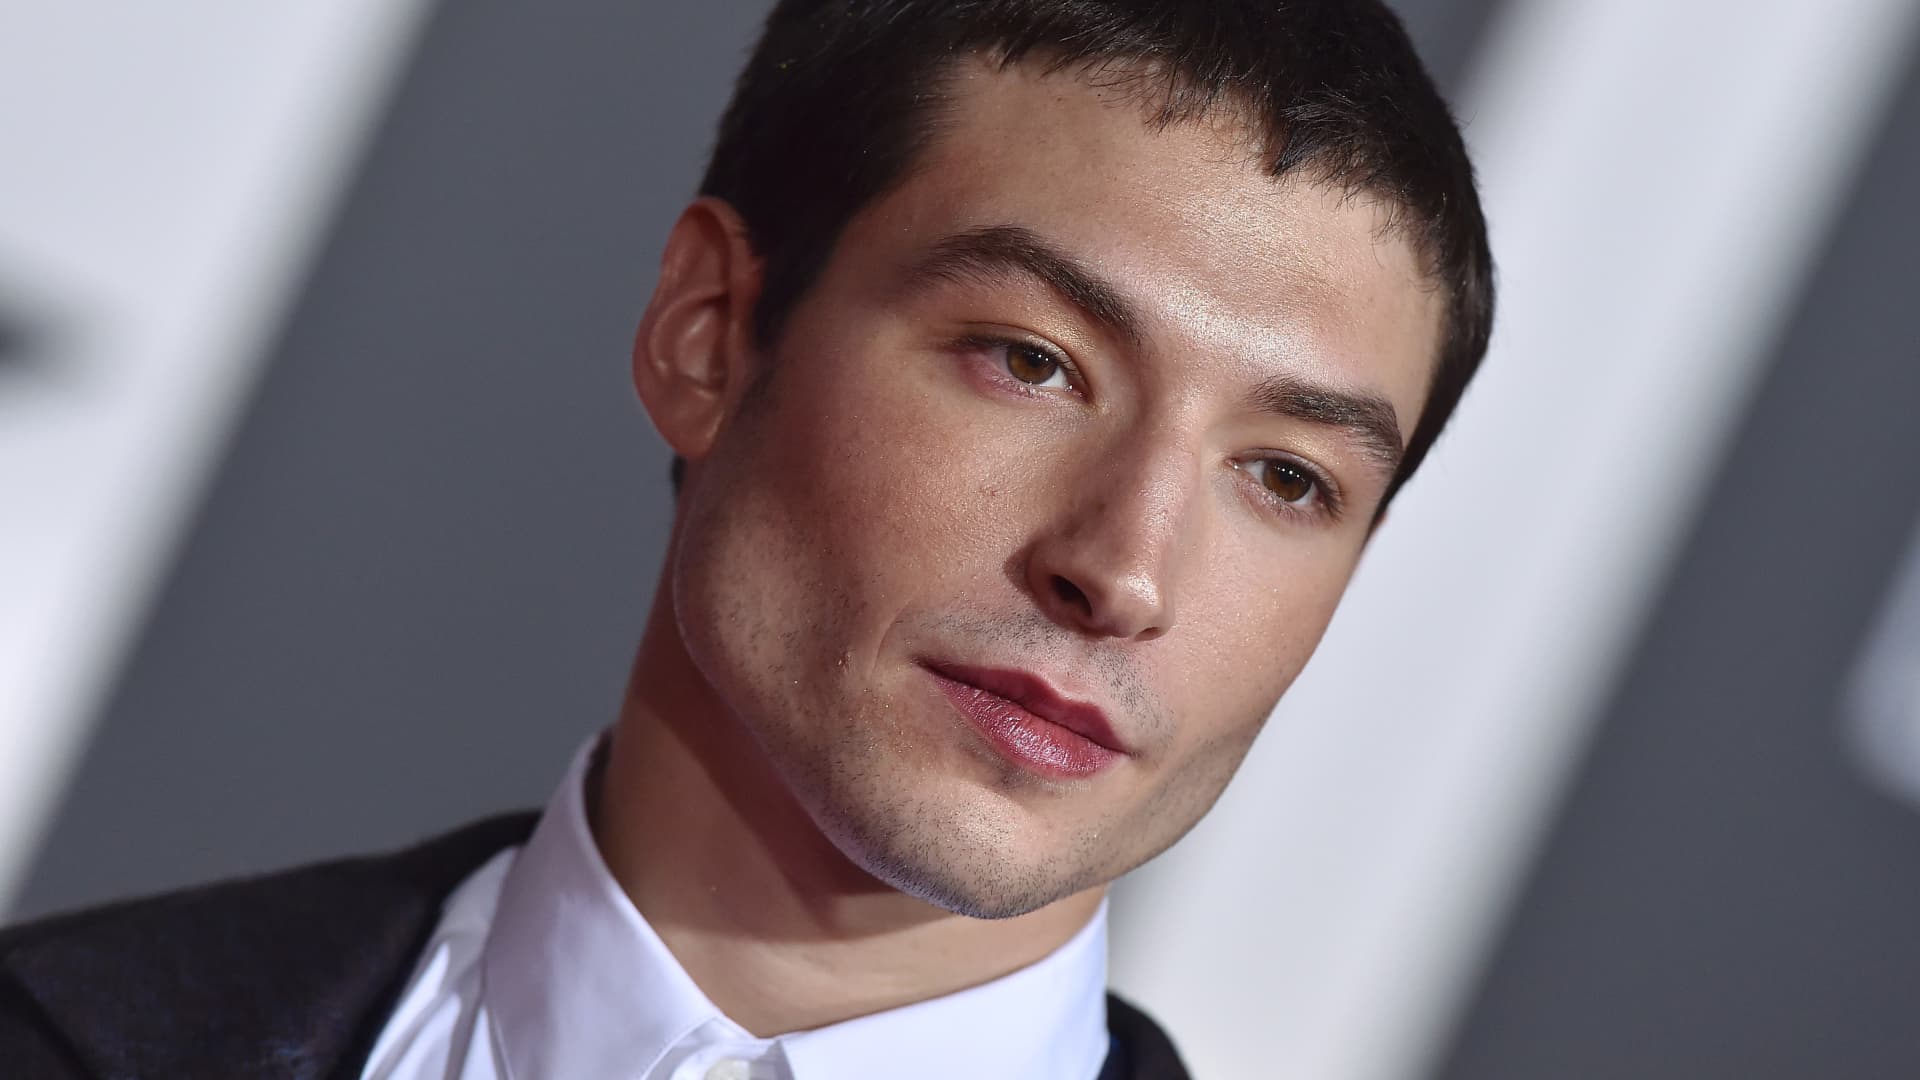 Ezra Miller scandals put drive on Warner Bros to handle grooming claims